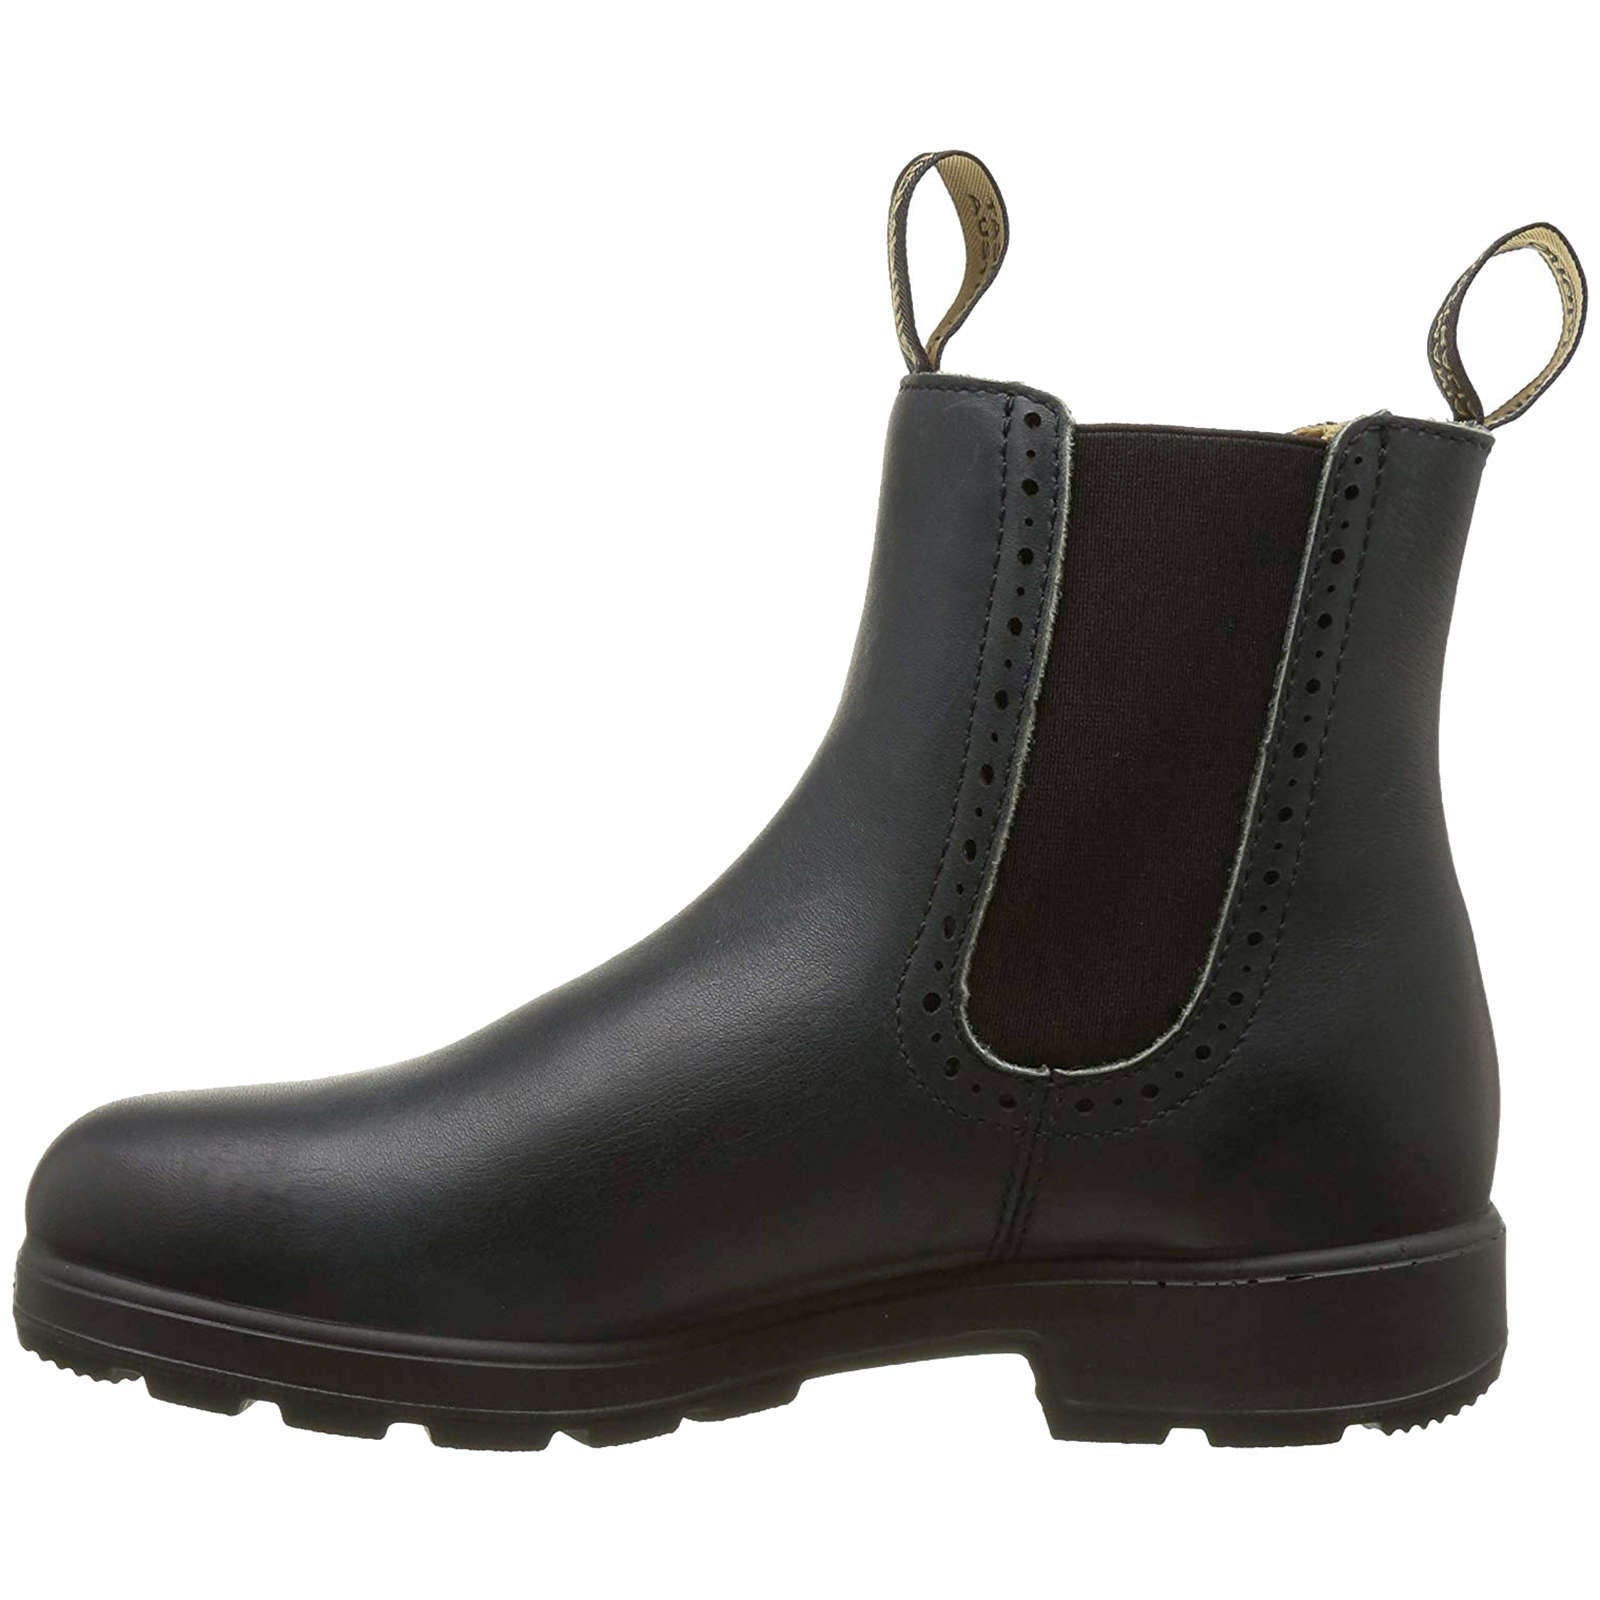 Blundstone 1441 Water-Resistant Leather Unisex Chelsea Boots#color_navy rub